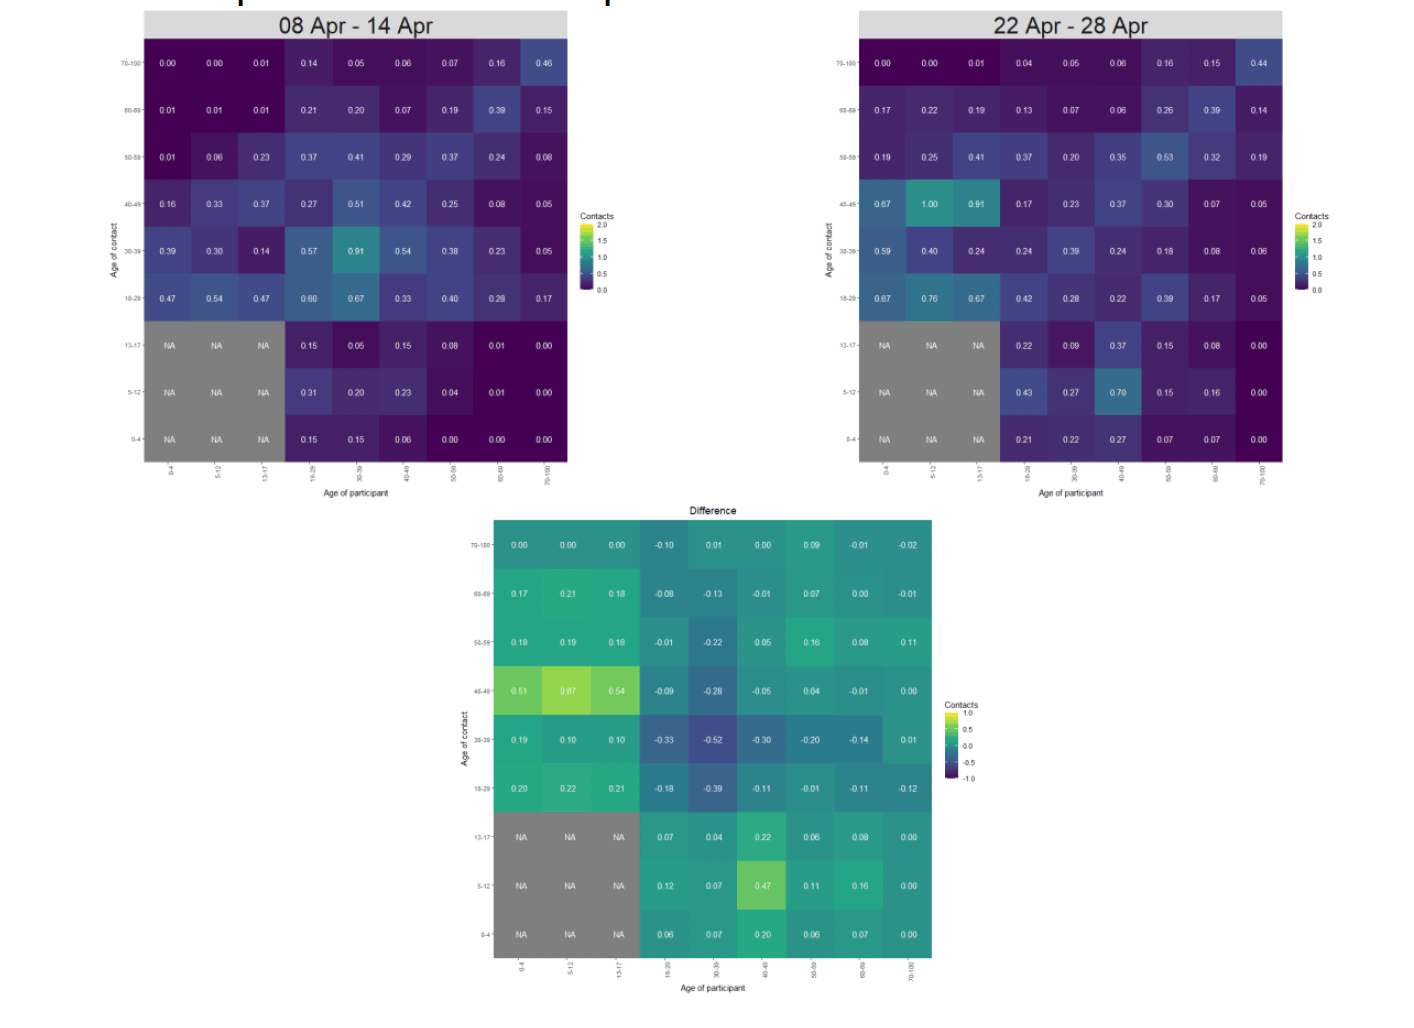 Heat maps showing the mean contacts by age group in the weeks of 8 April and 22 April.